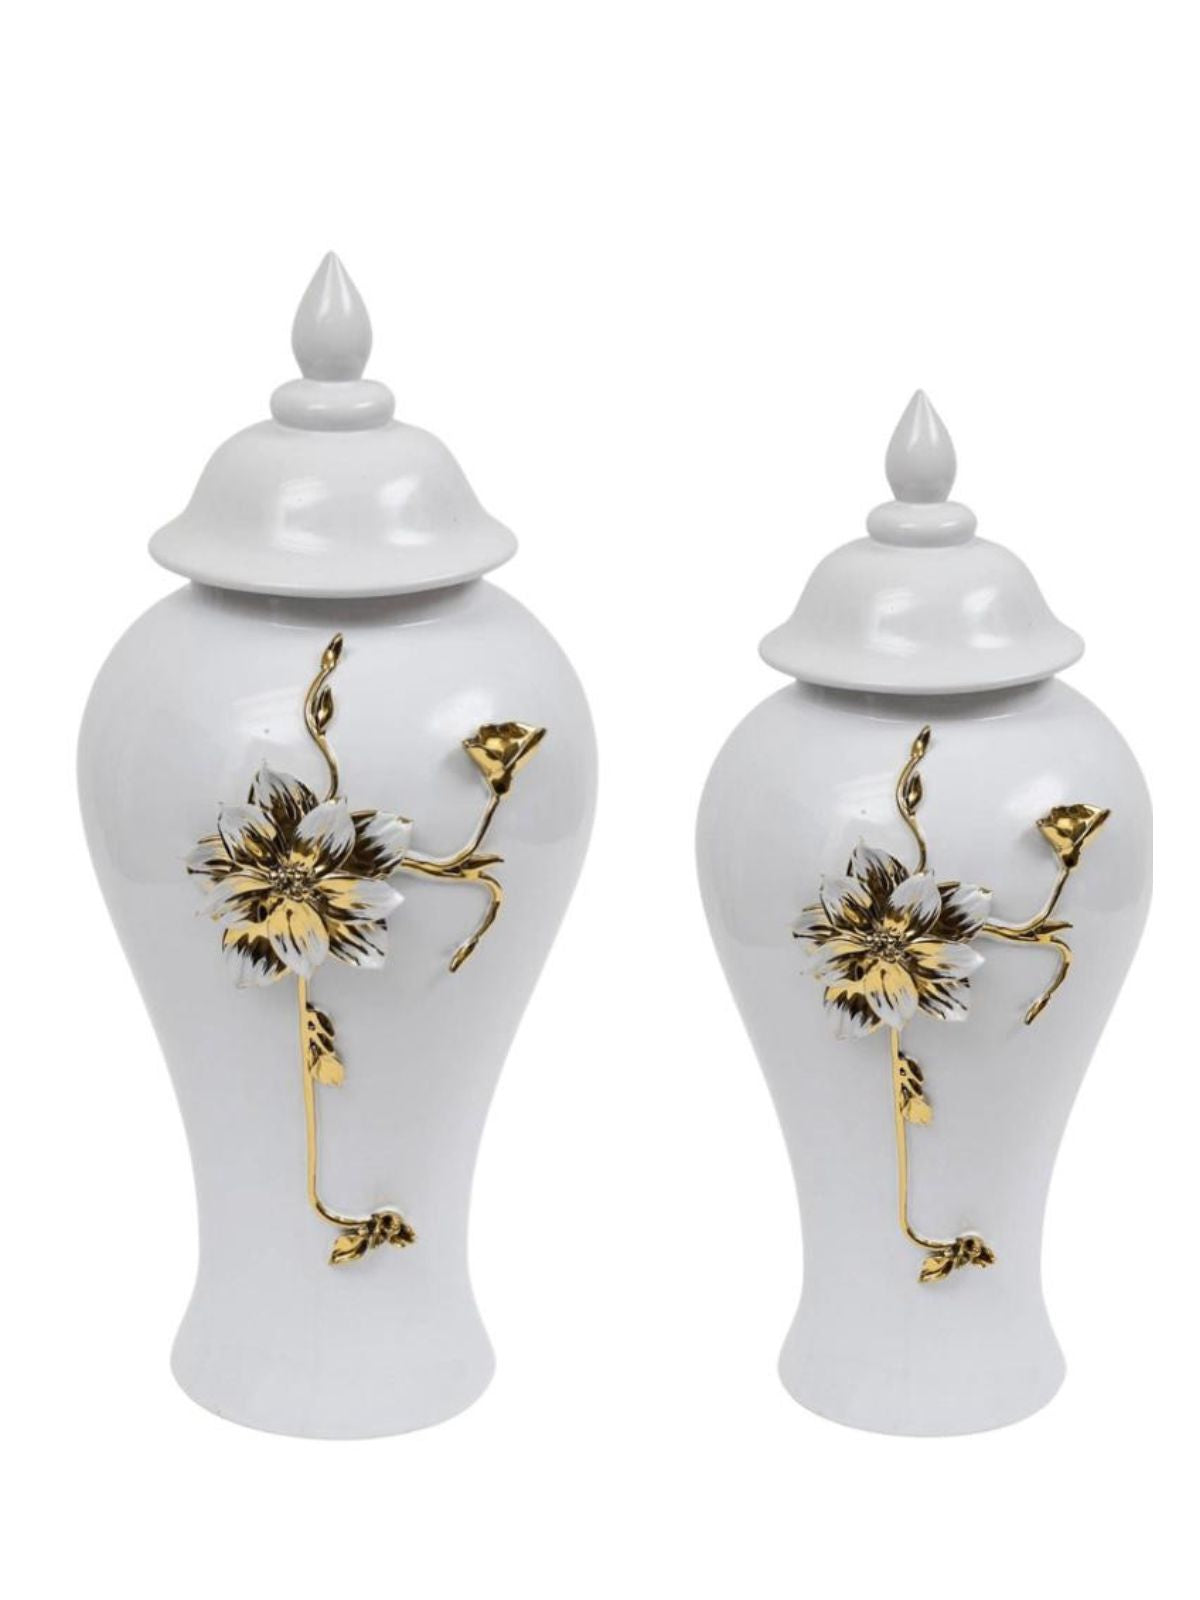 White Ceramic Ginger Jar with Gold Flower Design and Removable Lid. 2 Sizes Sold by KYA Home Decor.